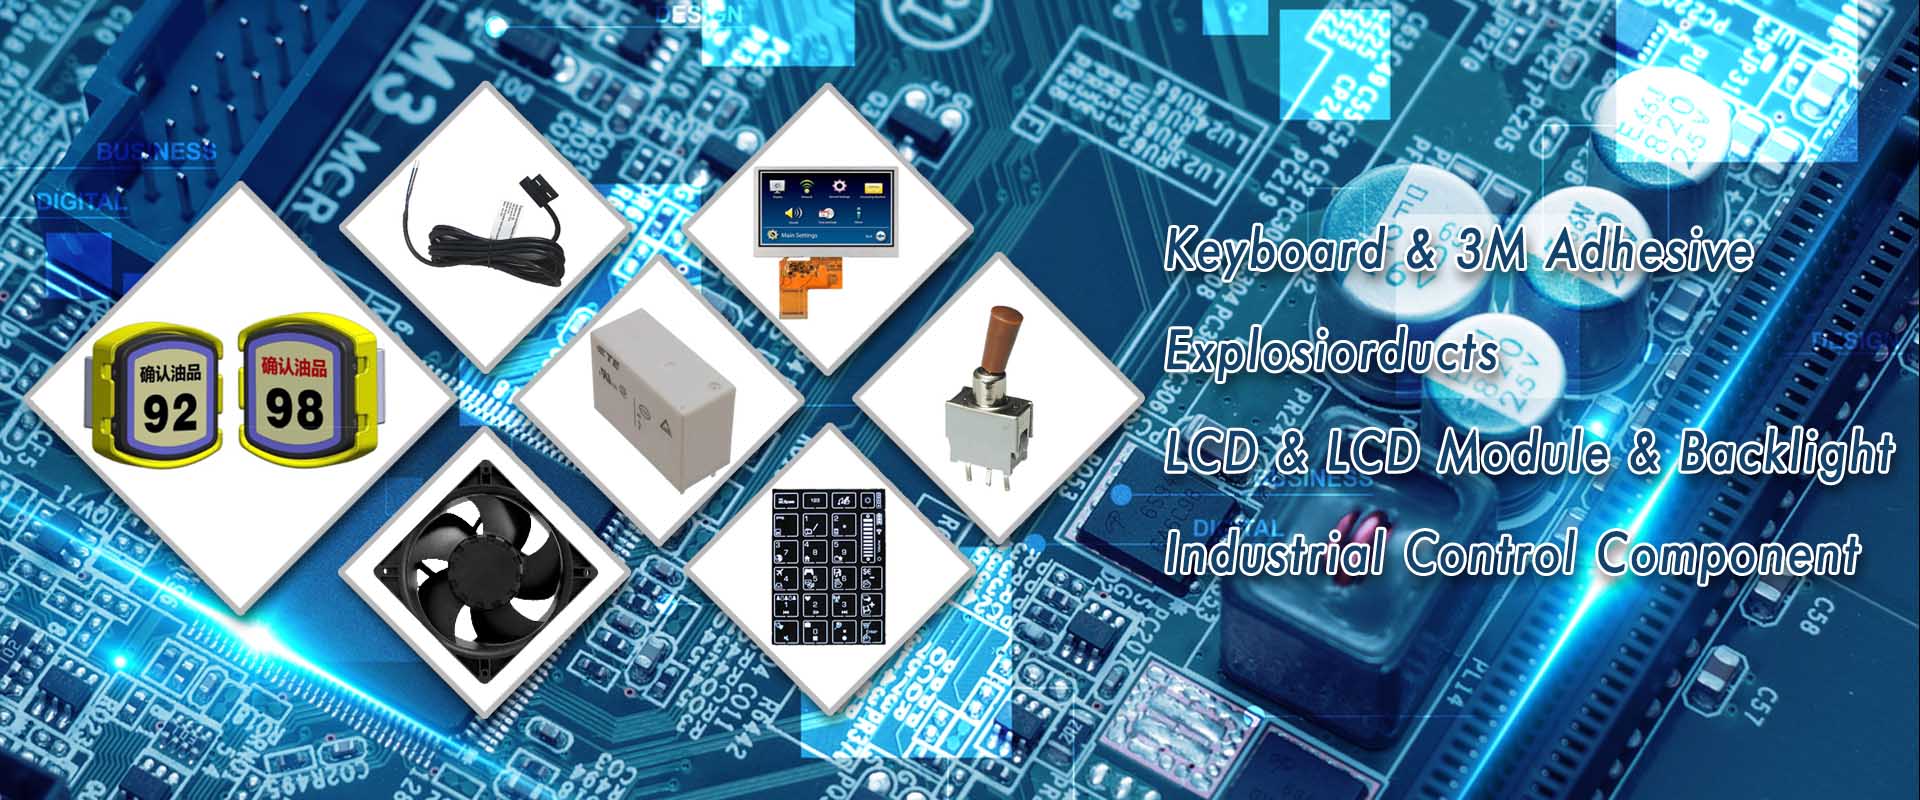 Explosion-Proof Products，Industrial Control Component，Keyboard / 3M Adhesive，LCD / LCD module / backlight